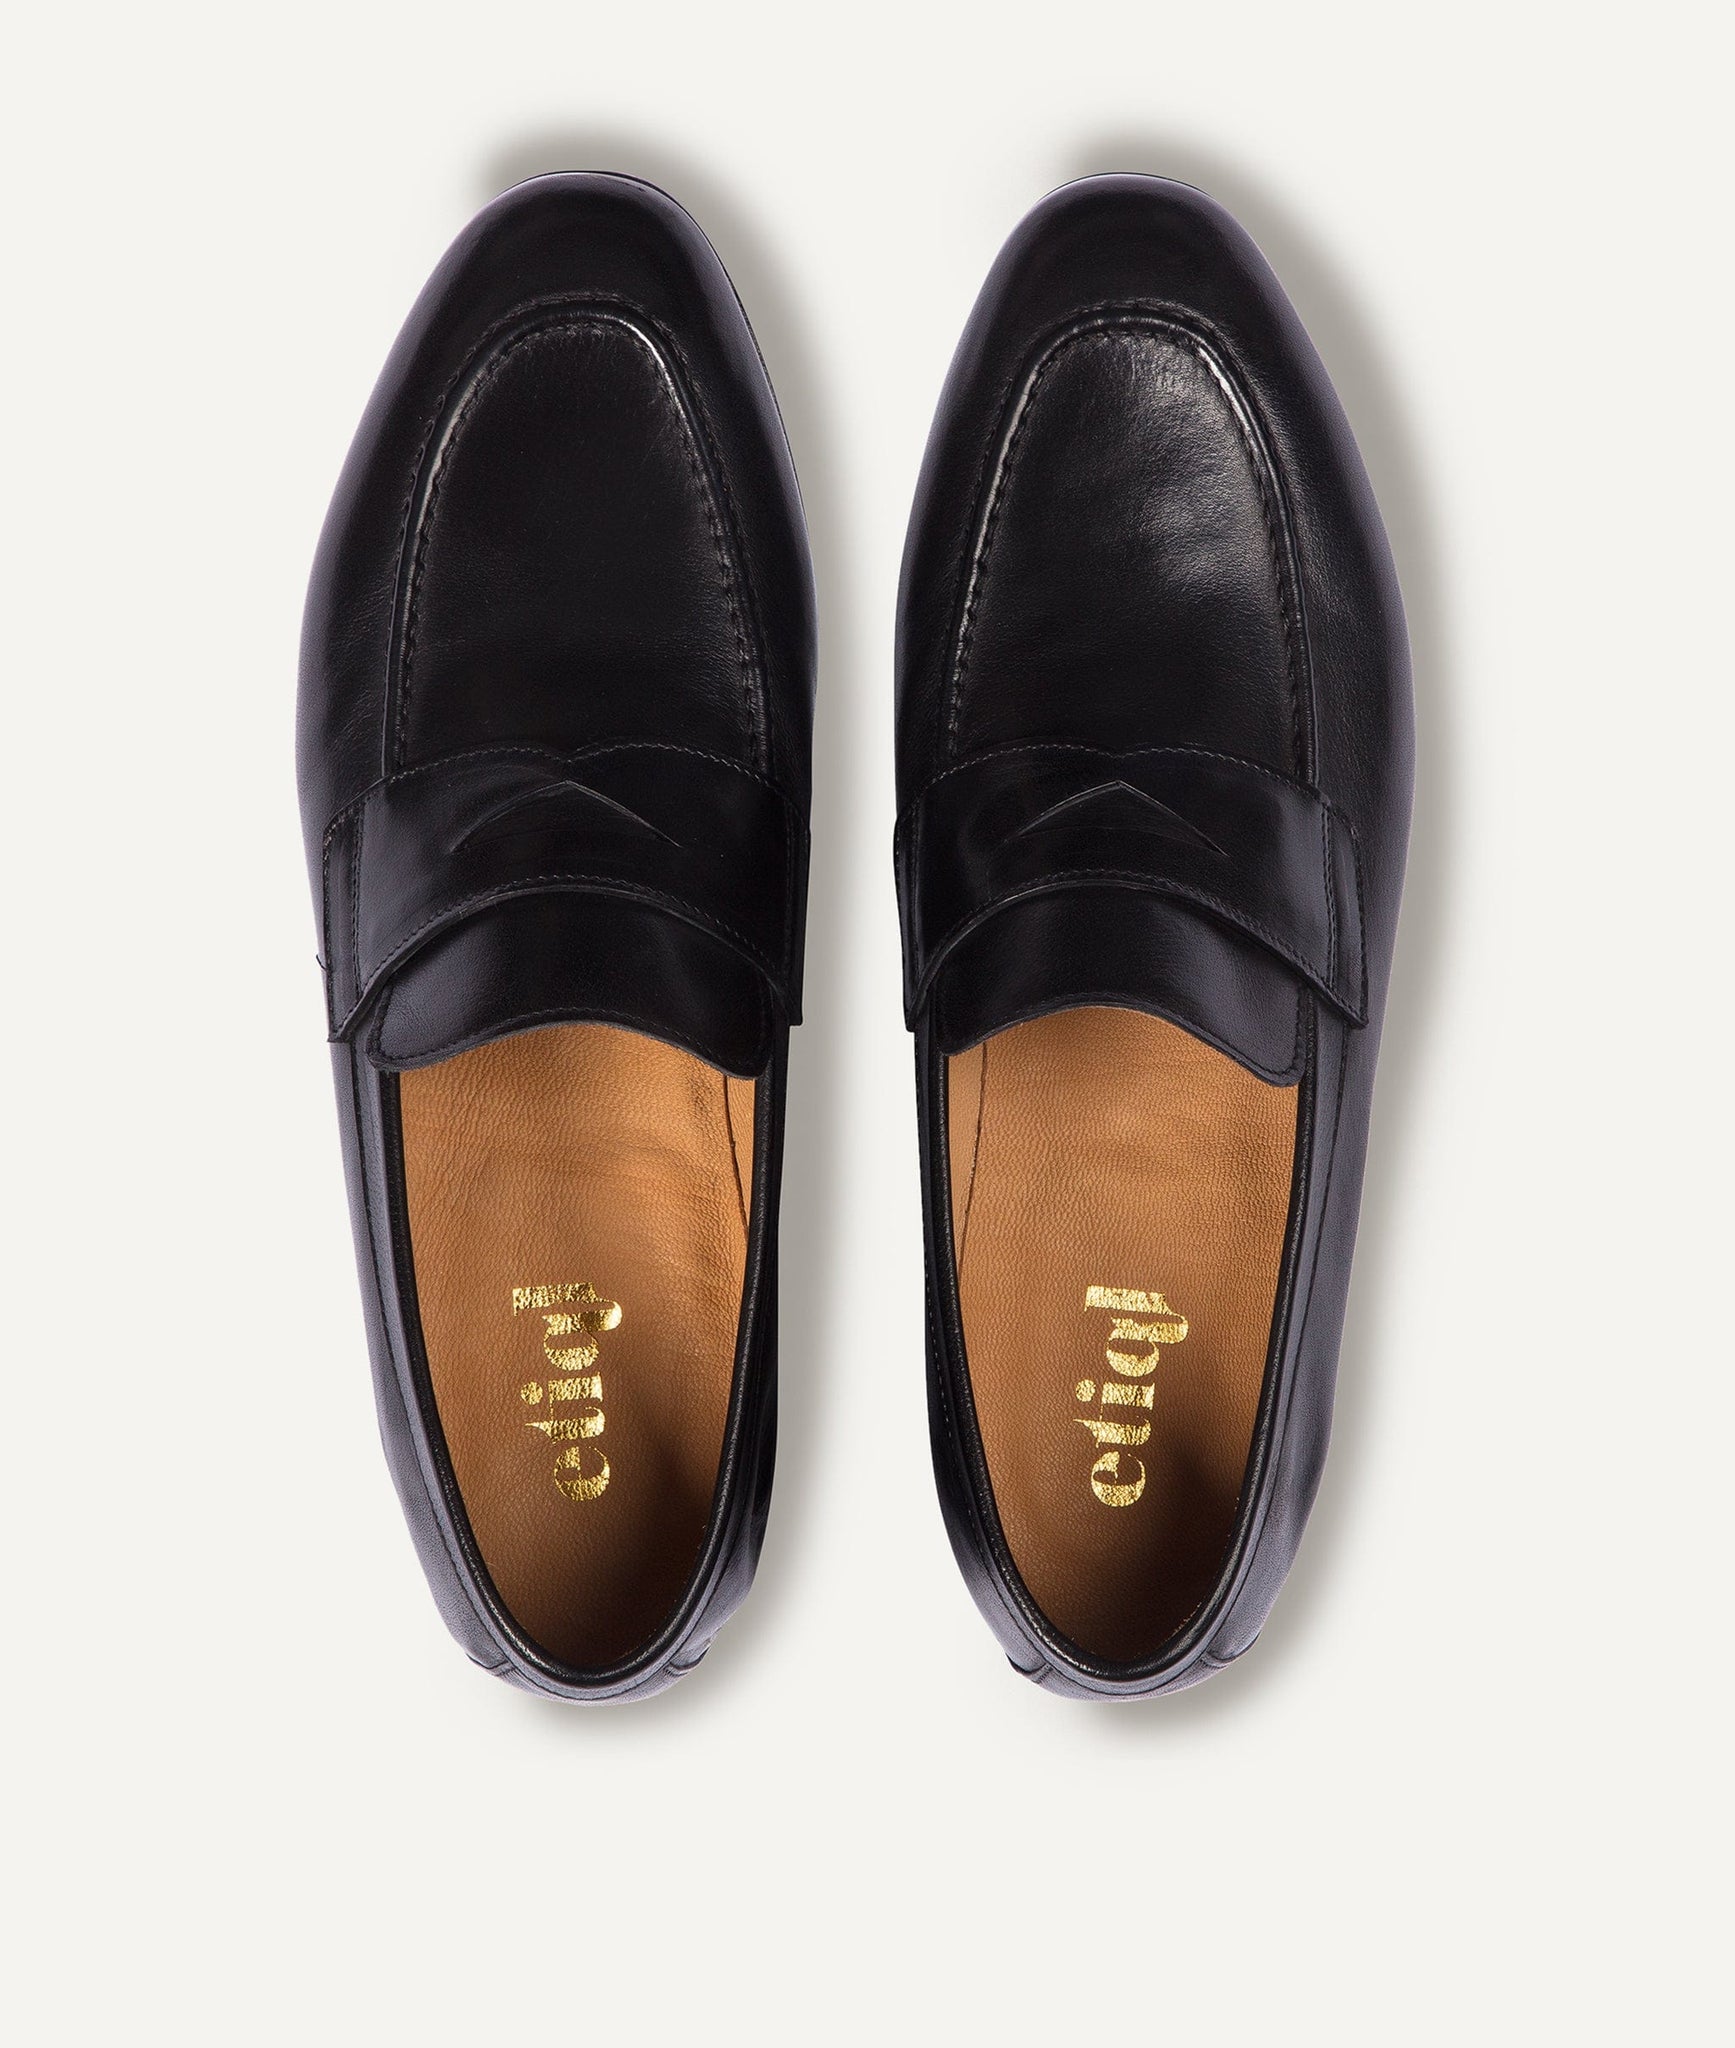 Penny Loafer in Buffalo Leather